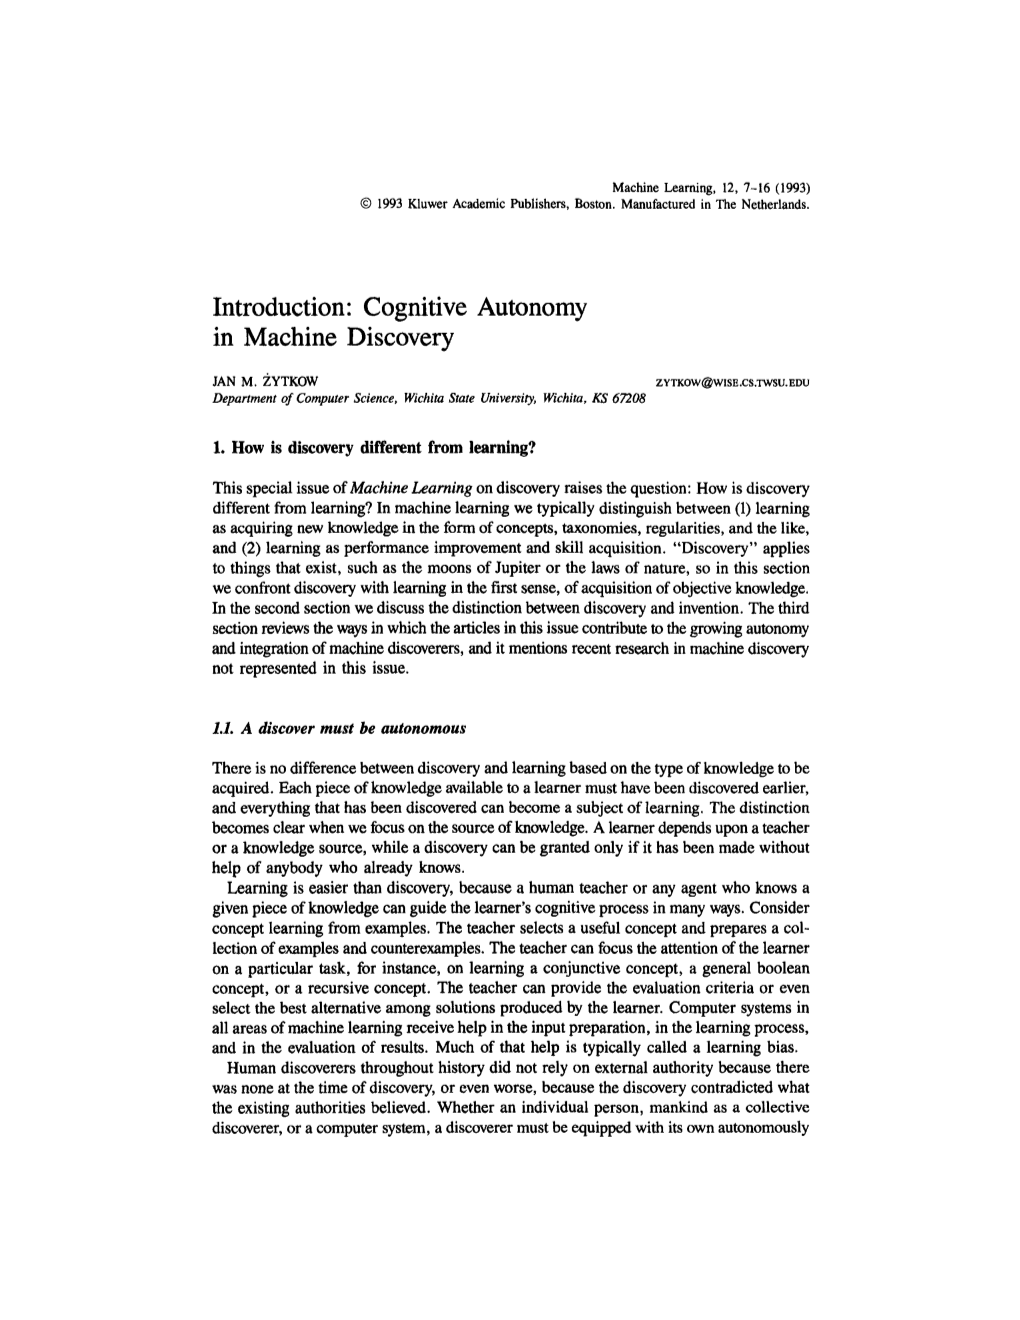 Introduction: Cognitive Autonomy in Machine Discovery